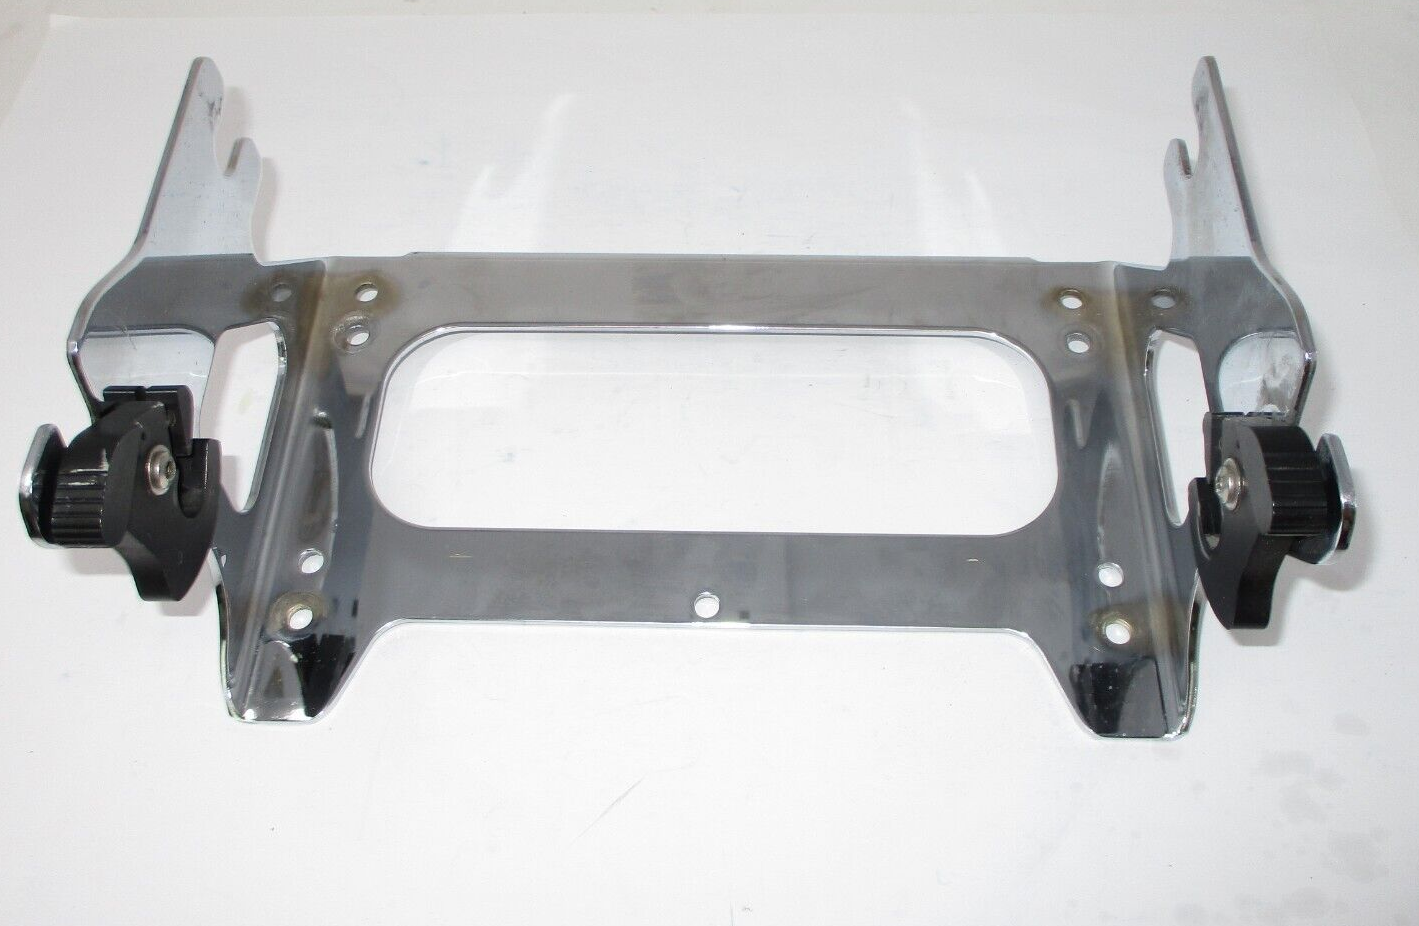 Harley-Davidson Two Up Detachable Tour Pack Rack   Part of Kit  53276-04A